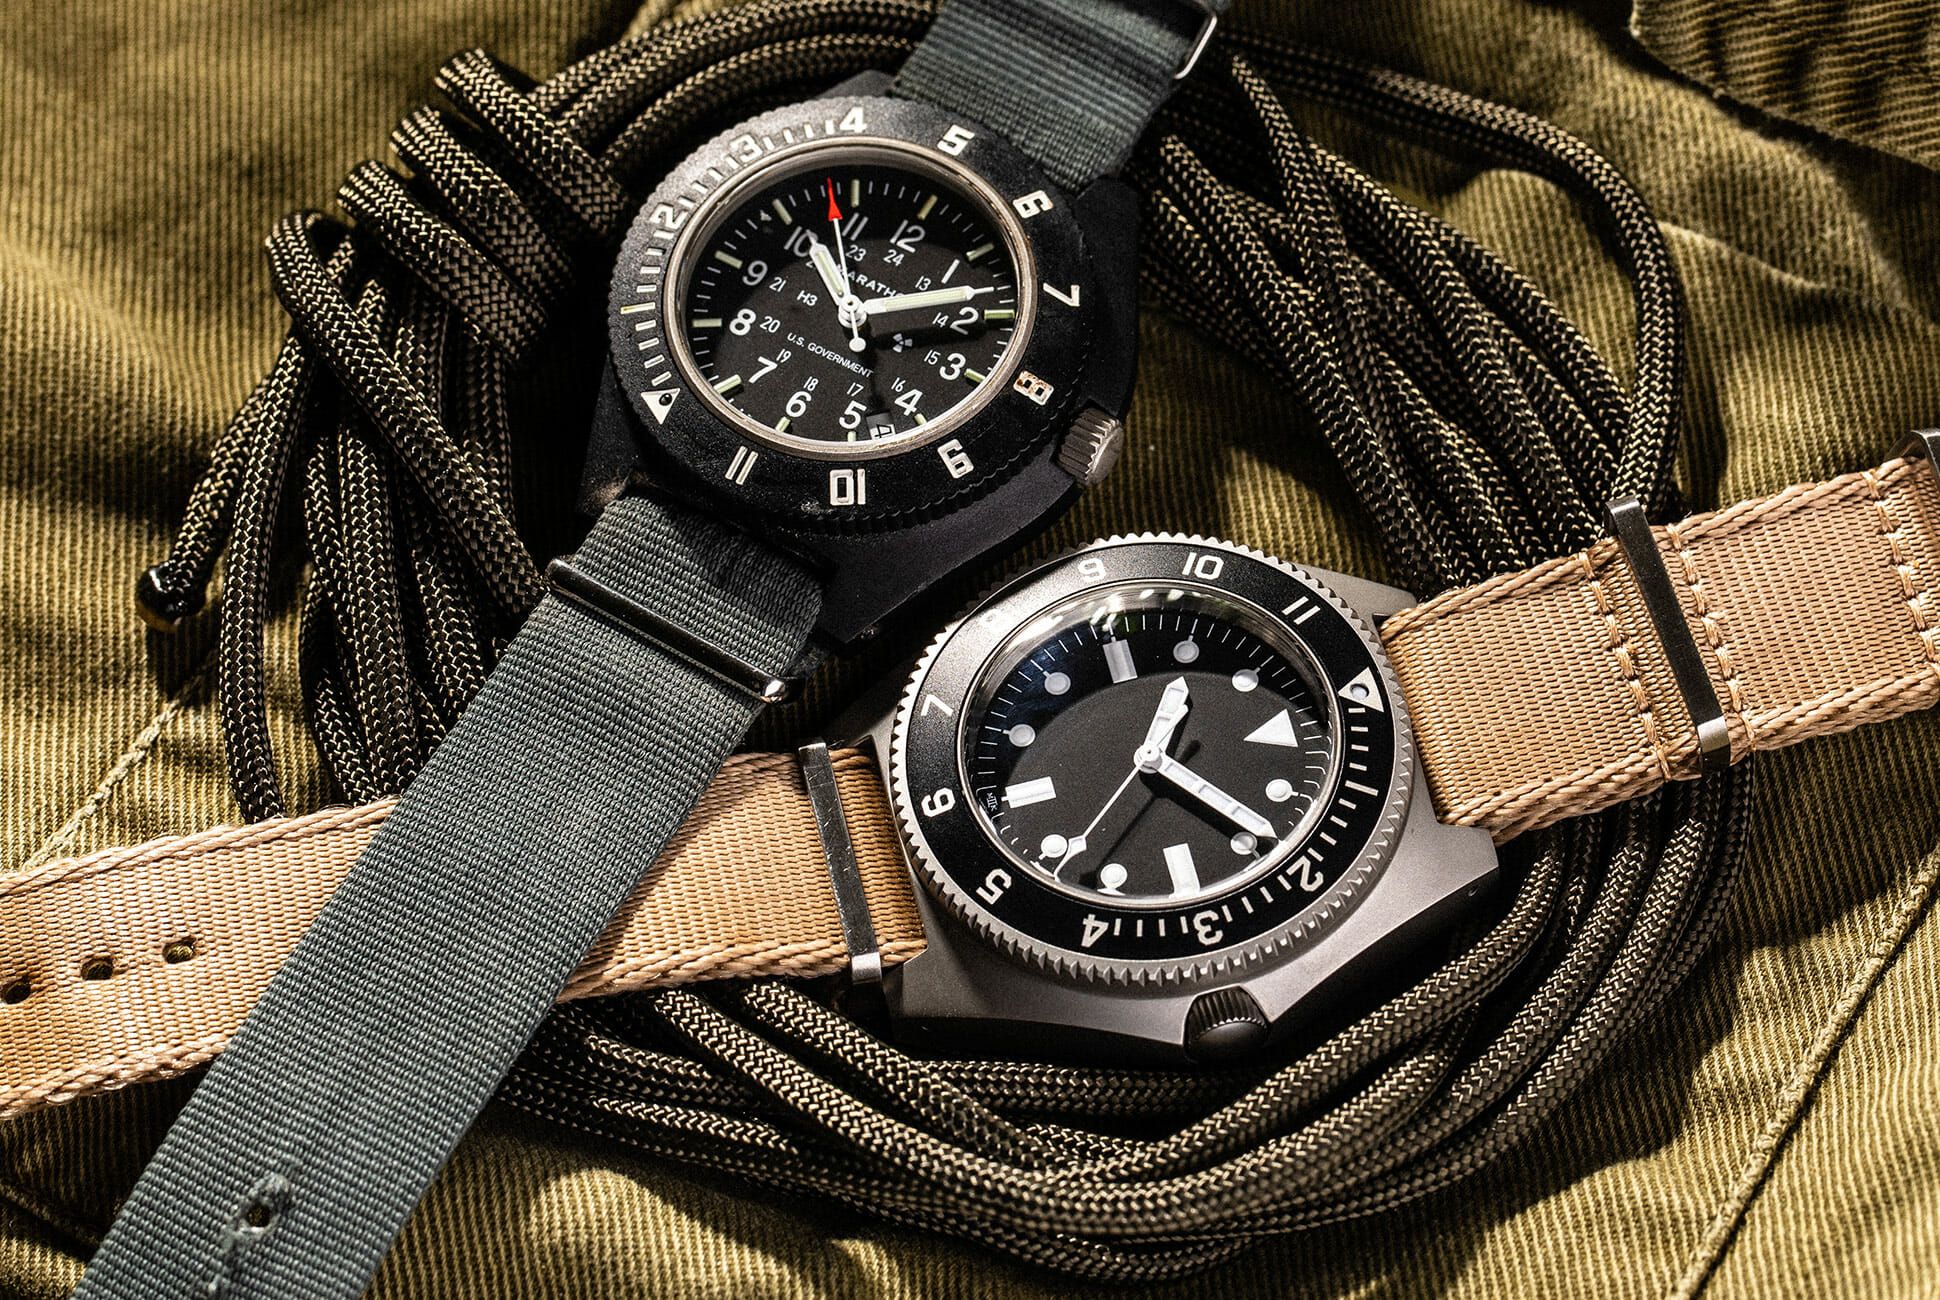 We Field-Tested Two Military Watches in the Army and This is What